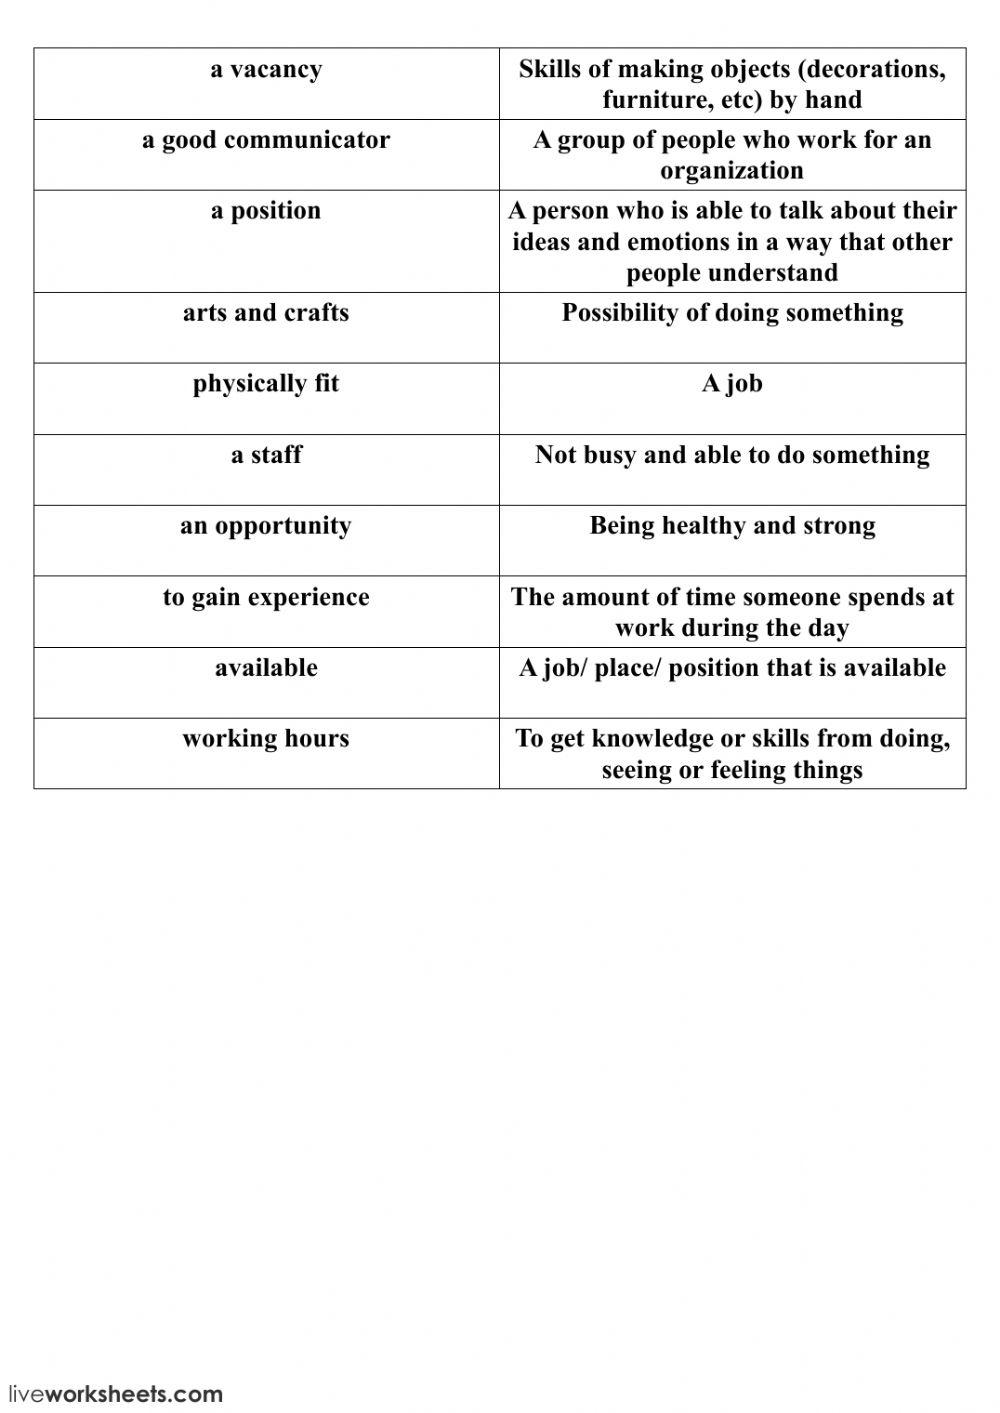 Jobs and interviewing